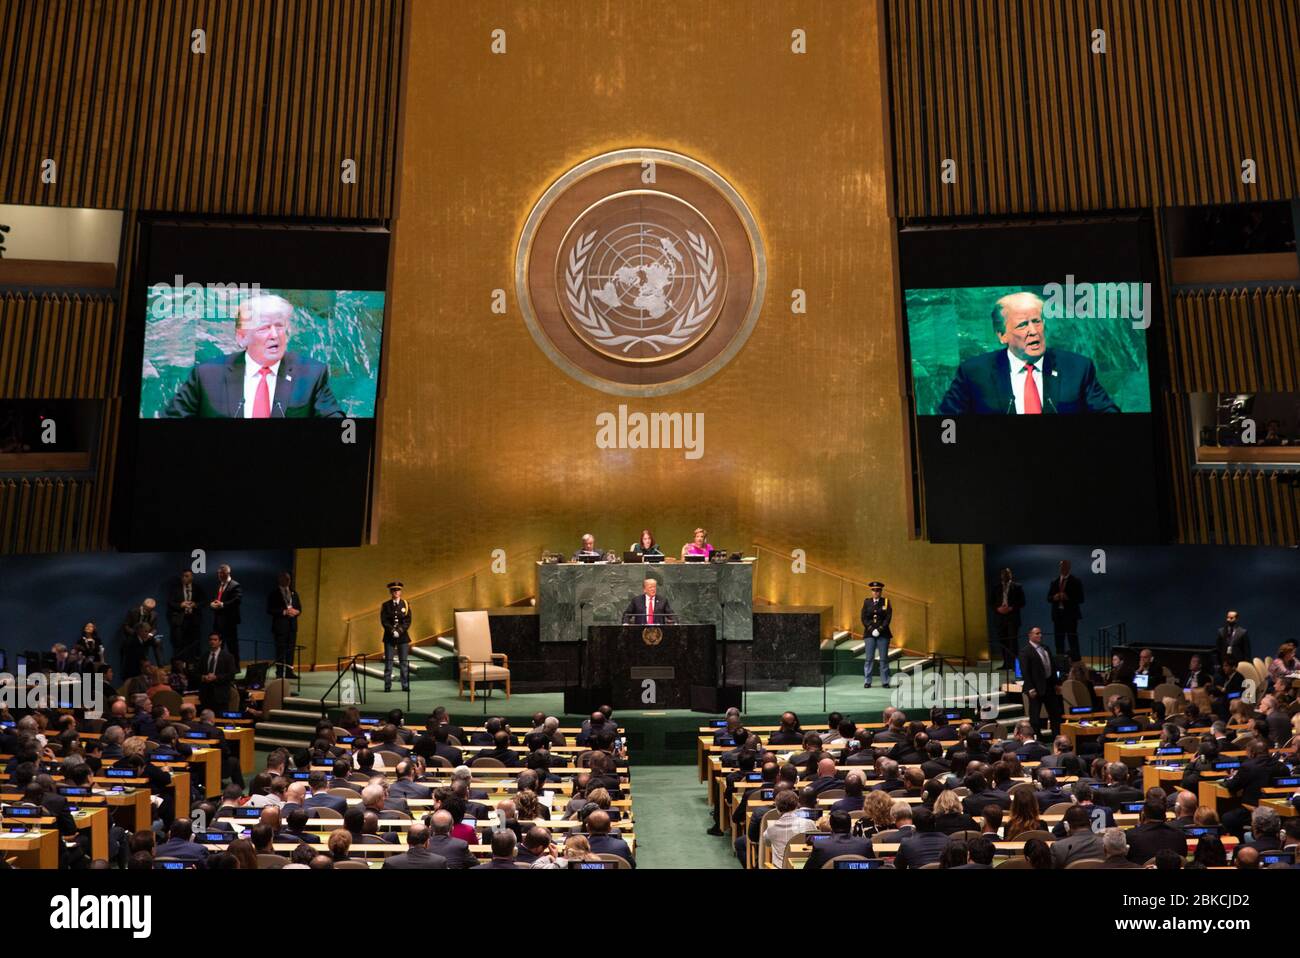 President Donald J. Trump addresses the 73rd session of the U.N. General Assembly Tuesday, Sept. 25, 2018, at the United Nations Headquarters in New York. The United Nations General Assembly Stock Photo